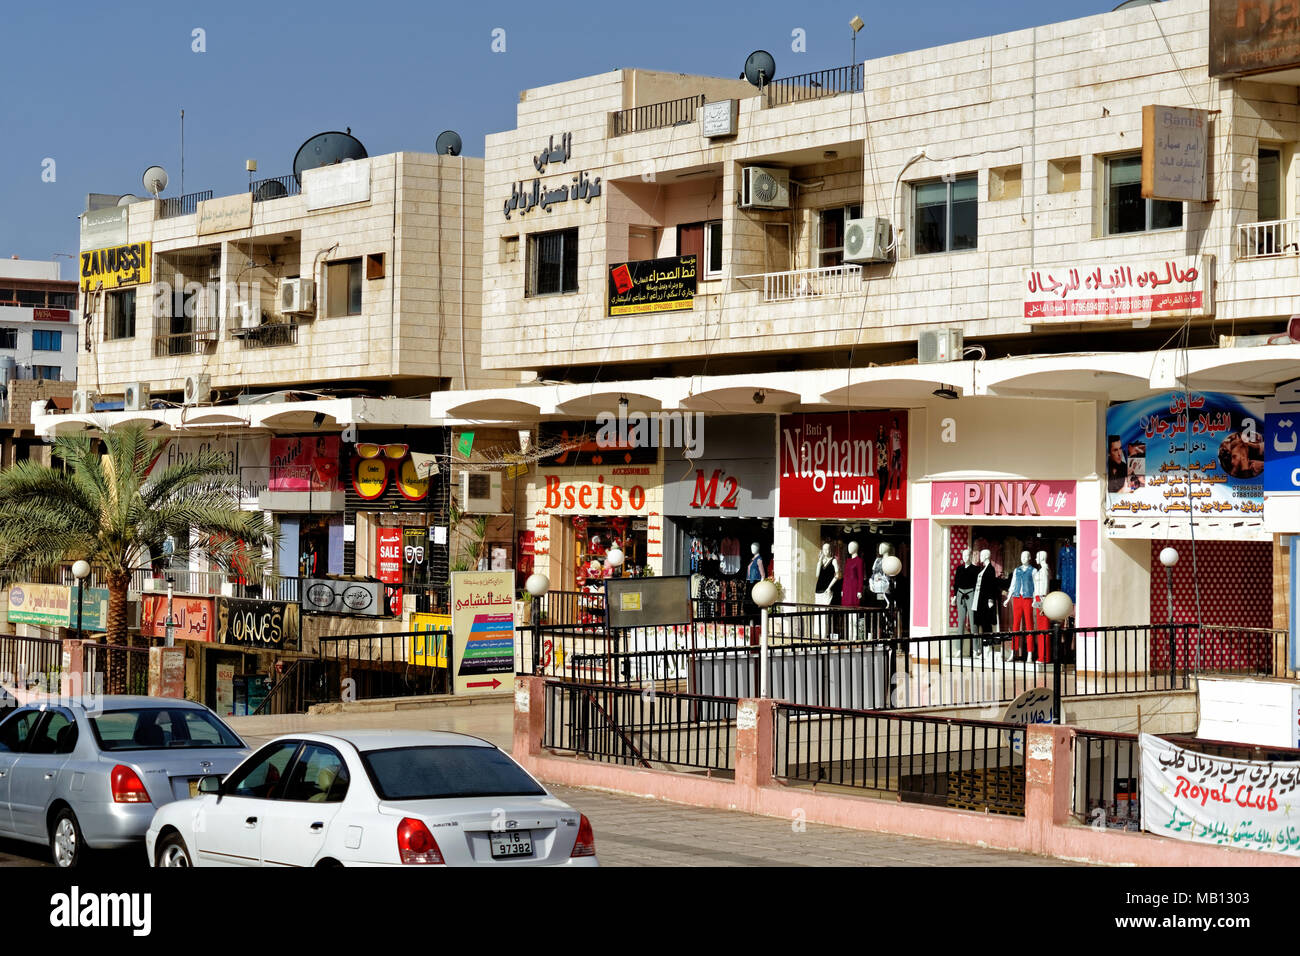 Aqaba, Jordan, March 7, 2018: Main shopping street for tourists with textile and jewellery shops behind colourful facades, middle east Stock Photo